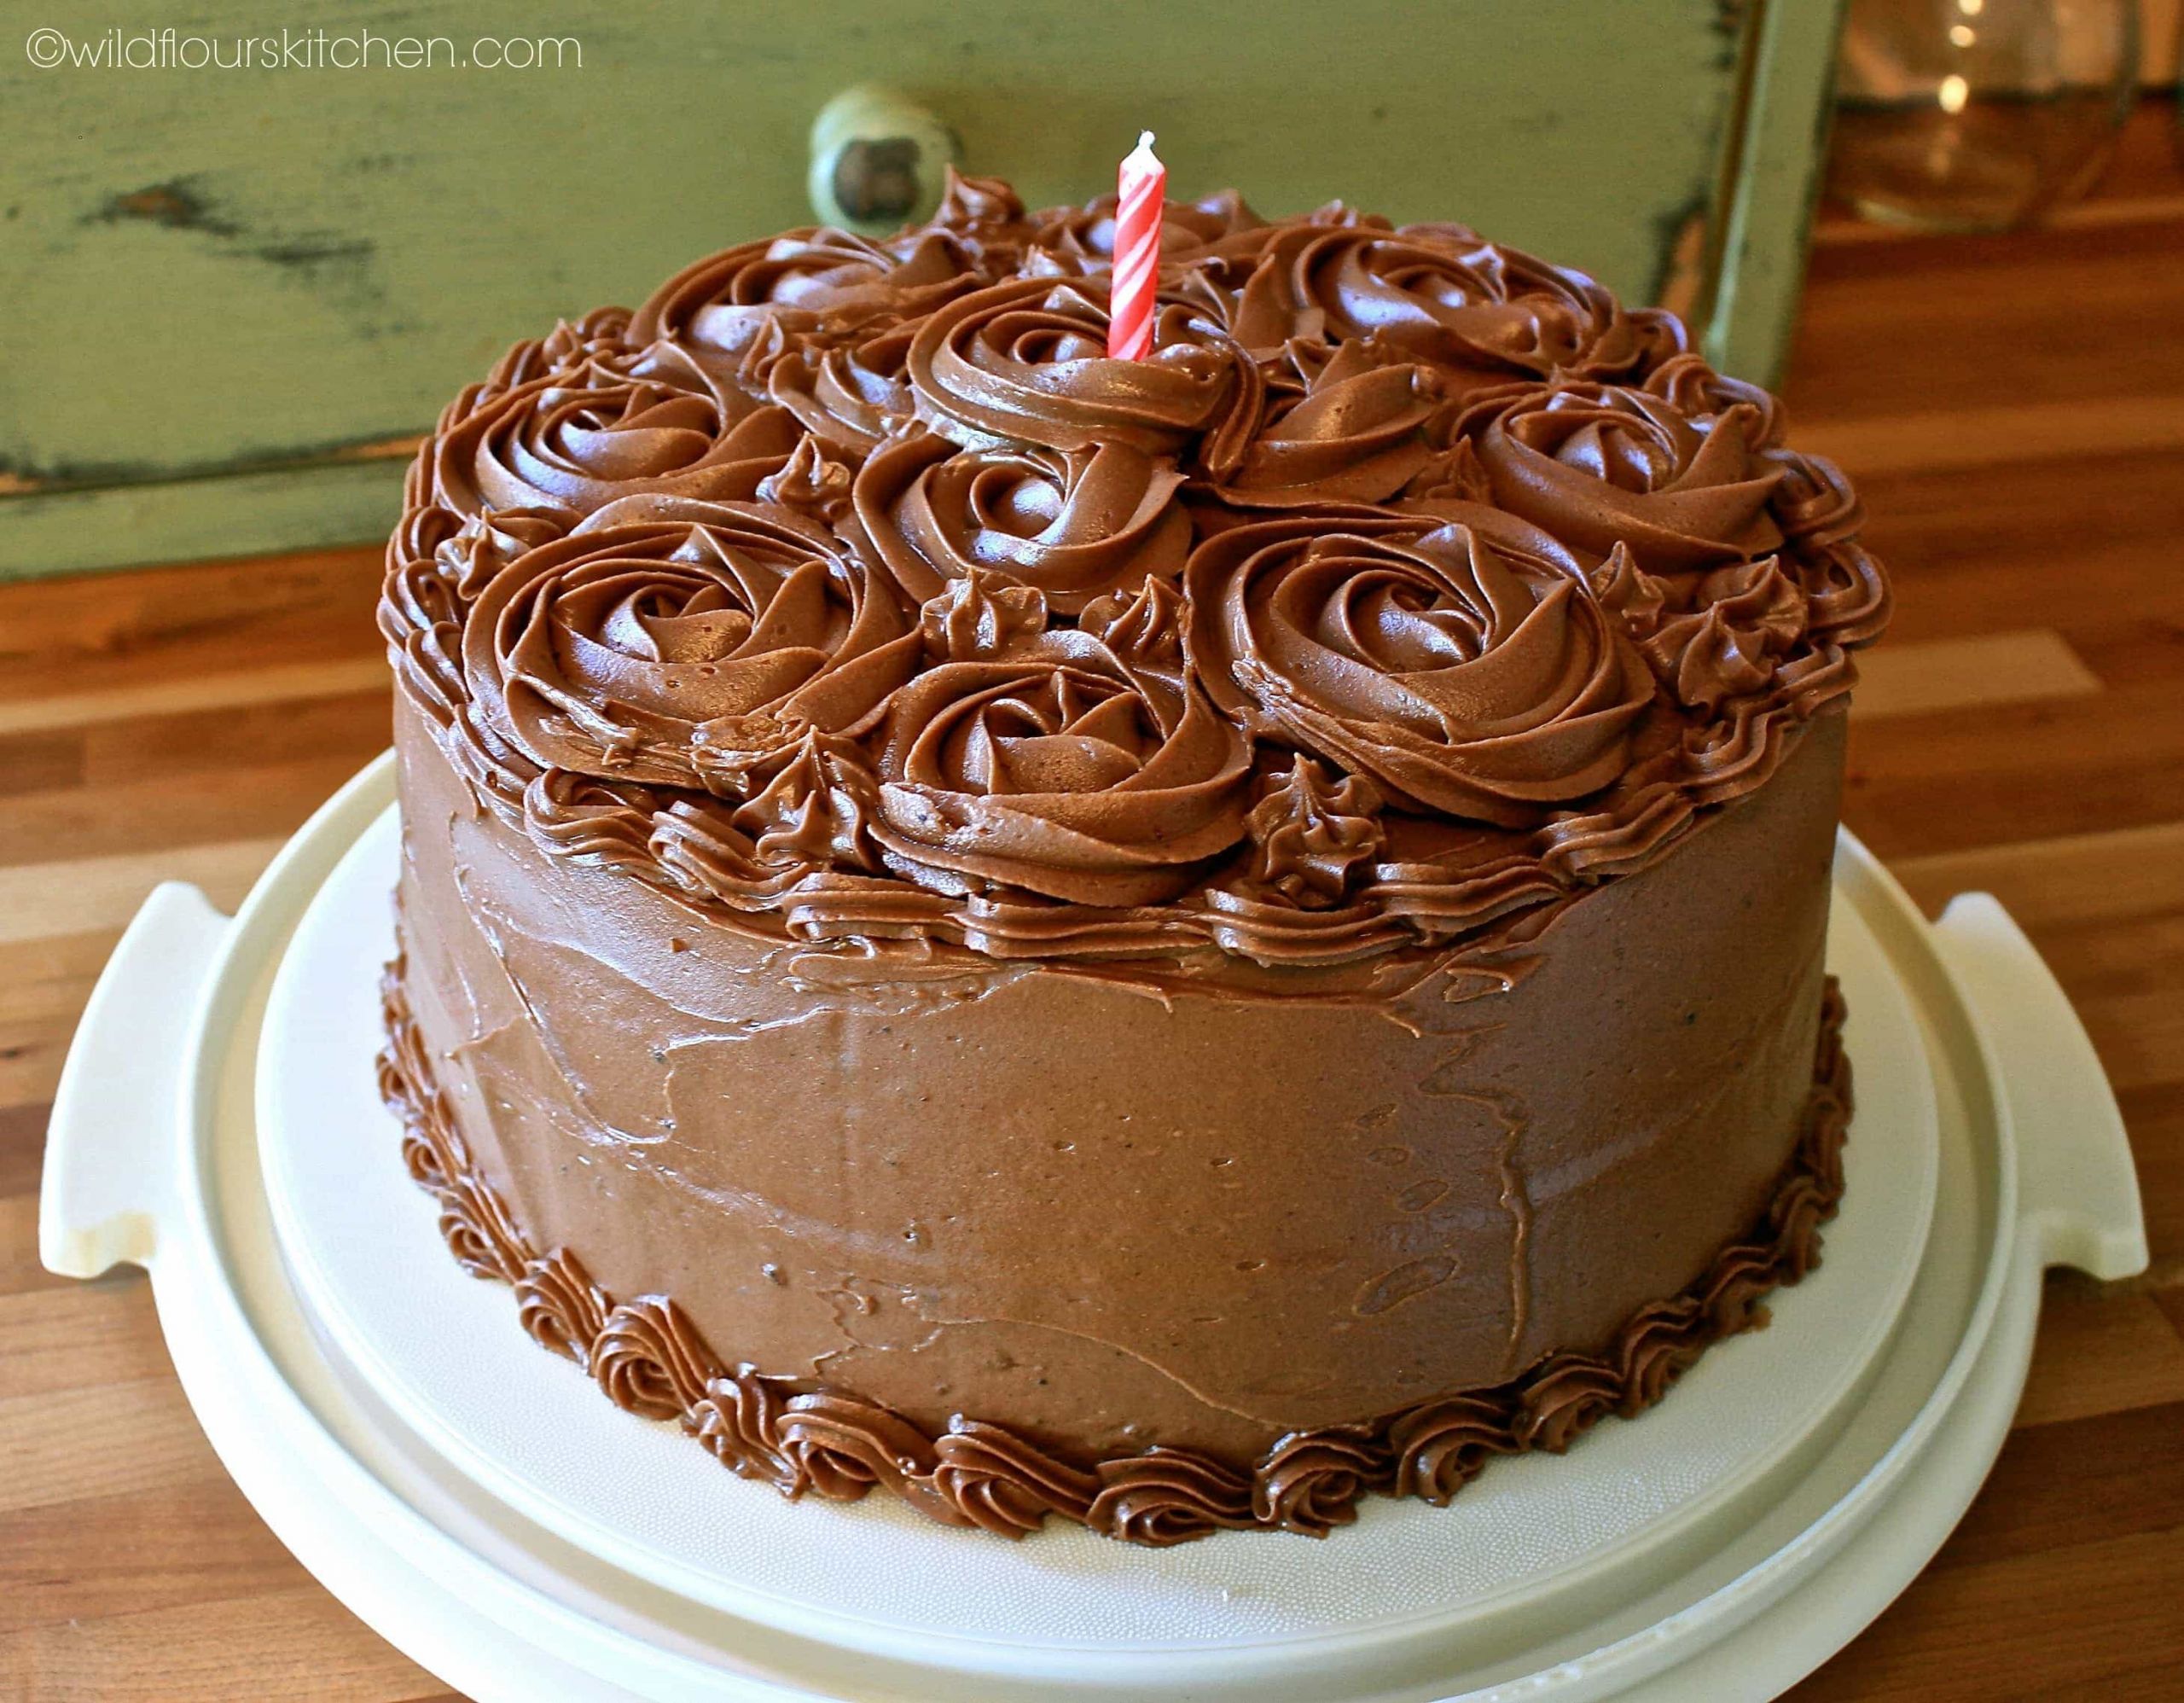 Chocolate Birthday Cakes
 Classic Chocolate Birthday Cake with a touch of Espresso